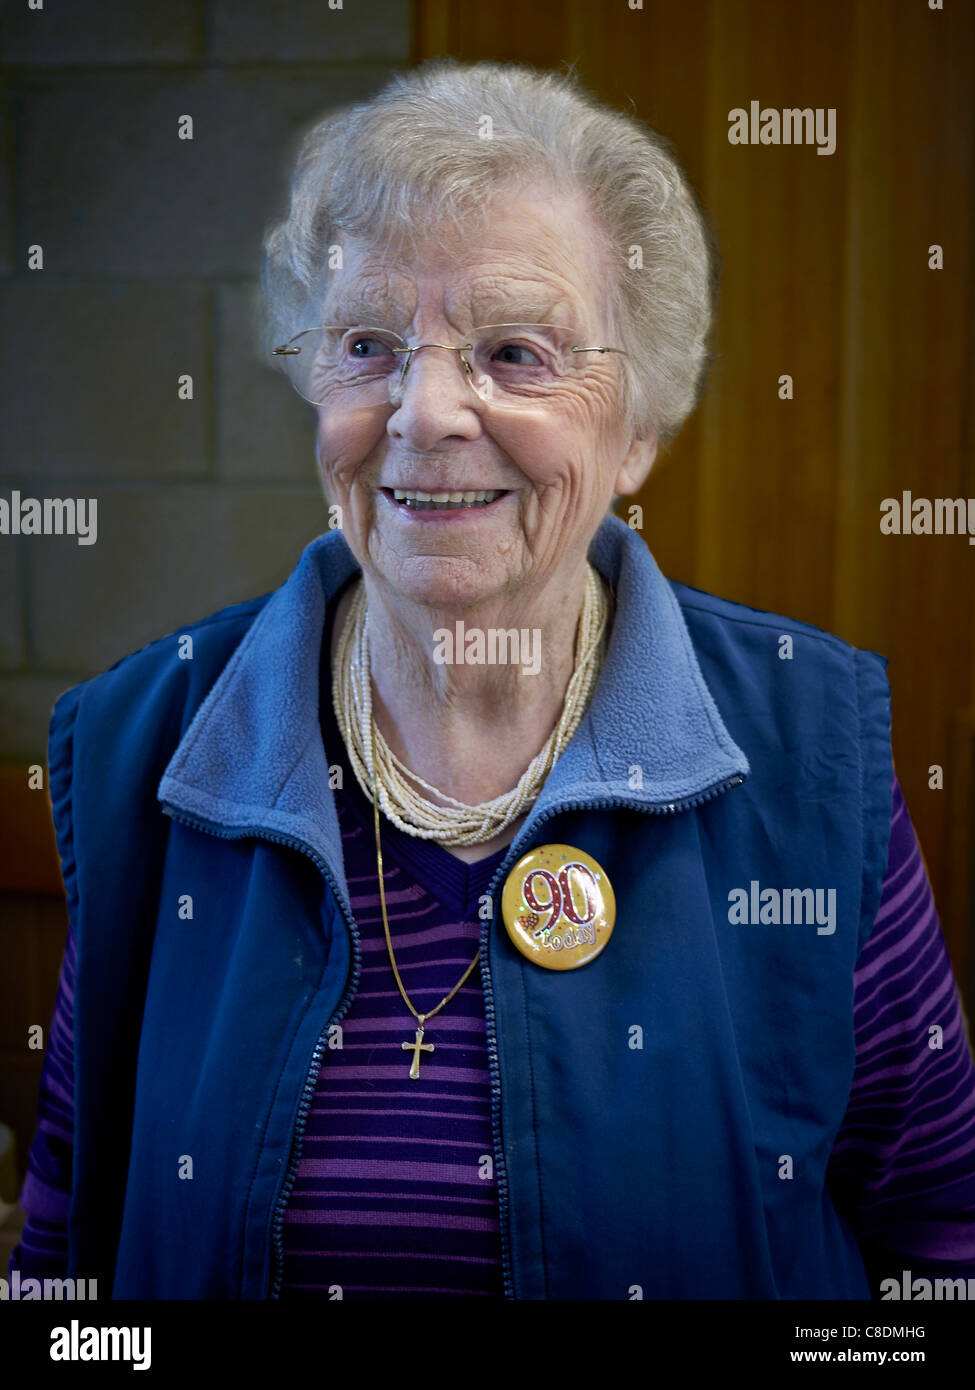 90 year old woman on her birthday and wearing an appropriate lapel badge. England UK Europe nonagenarian people Stock Photo